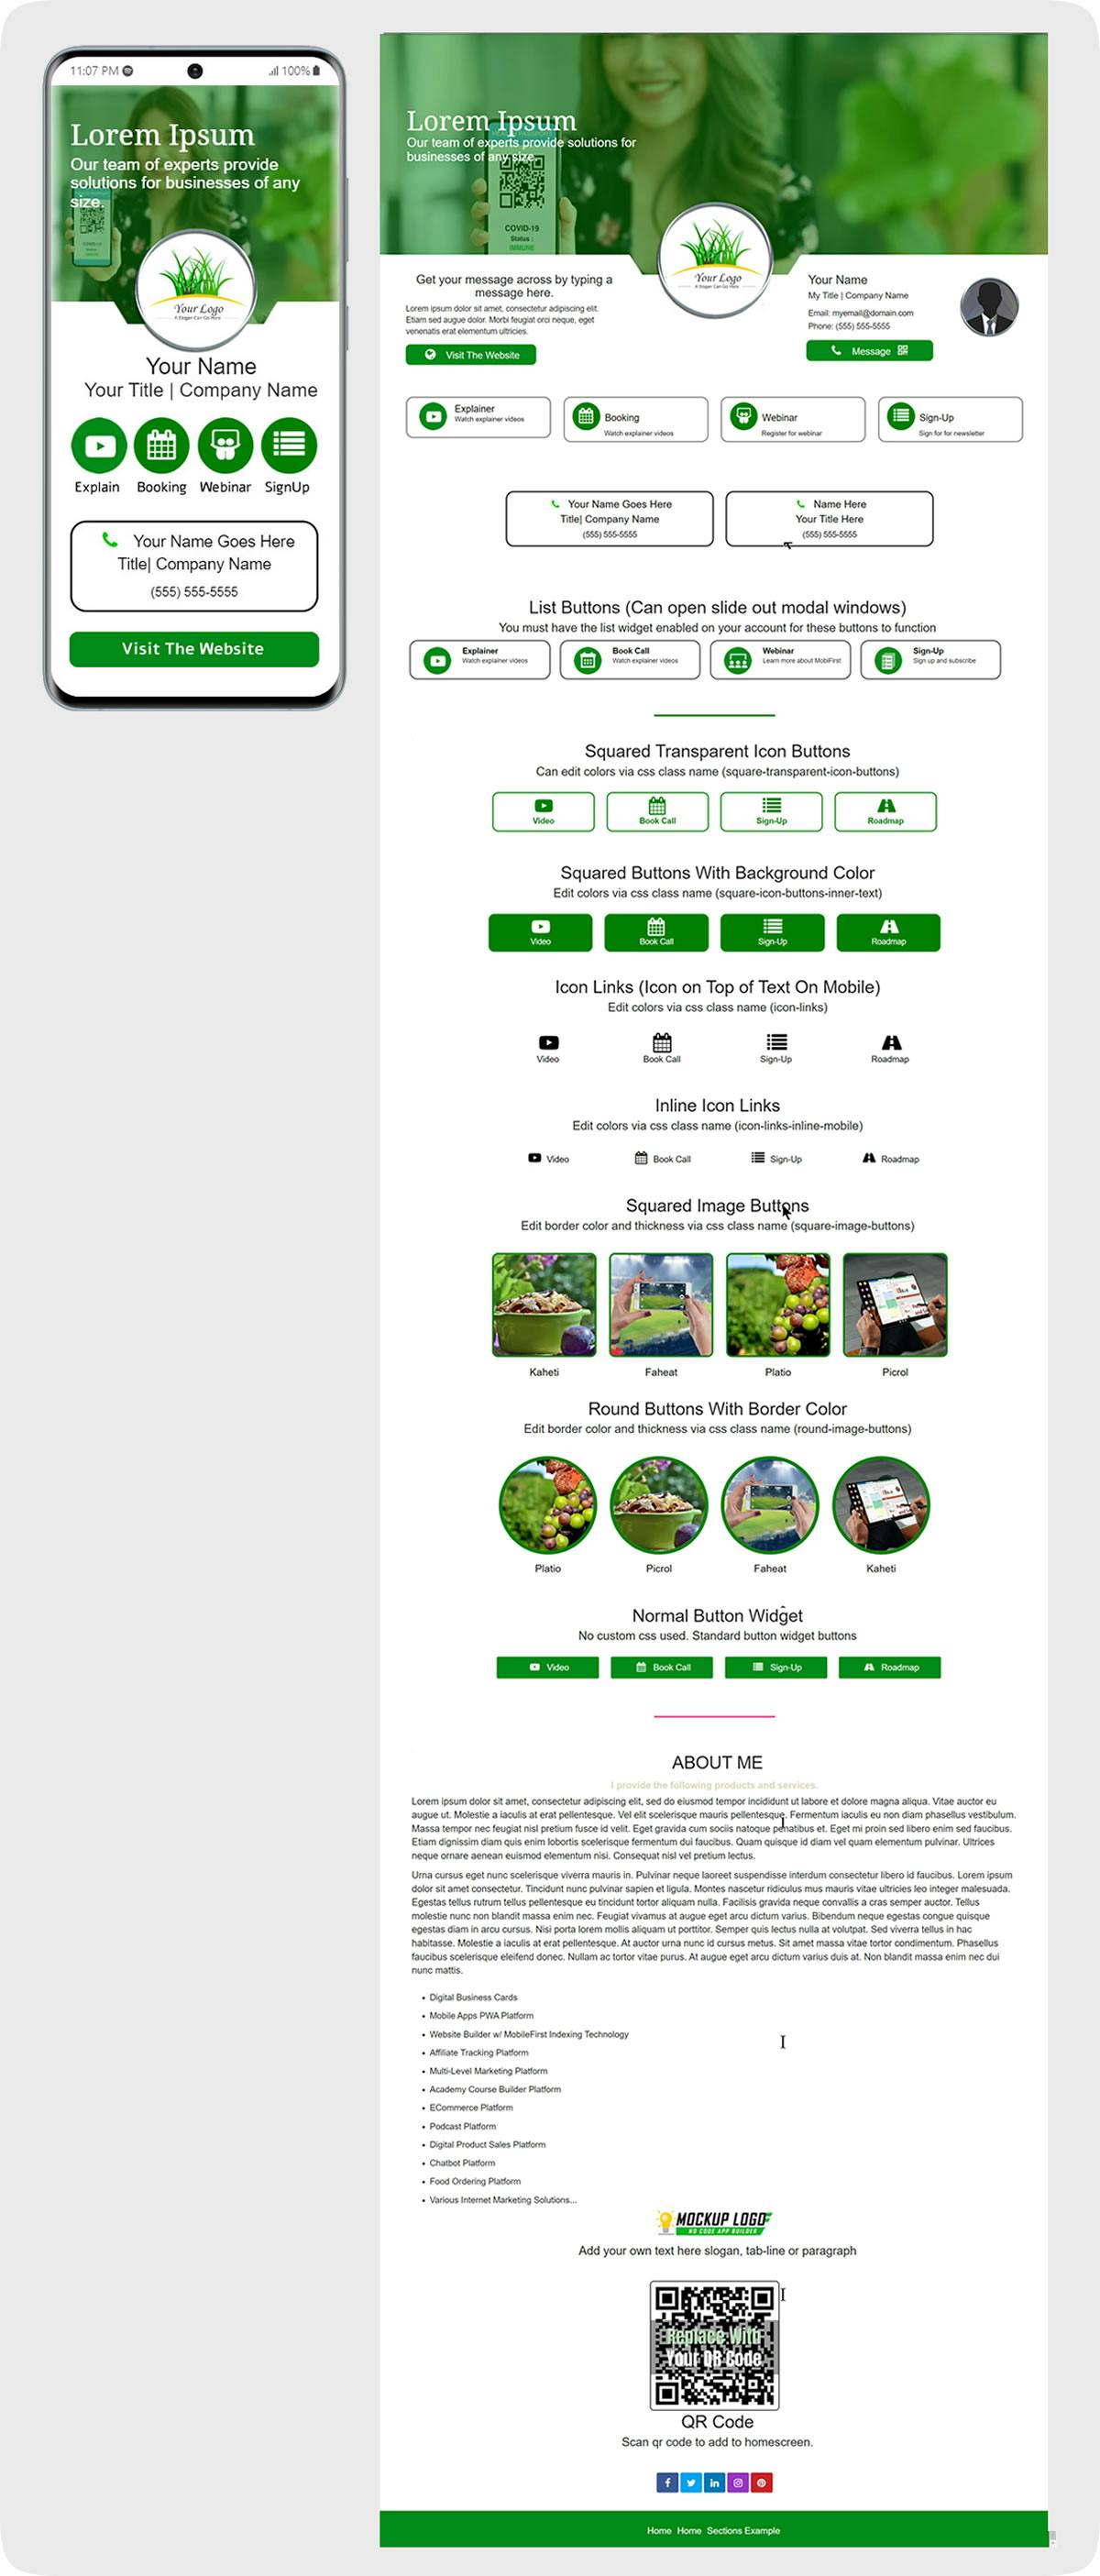 Mobile and desktop view of the MobiFirst green themed template.